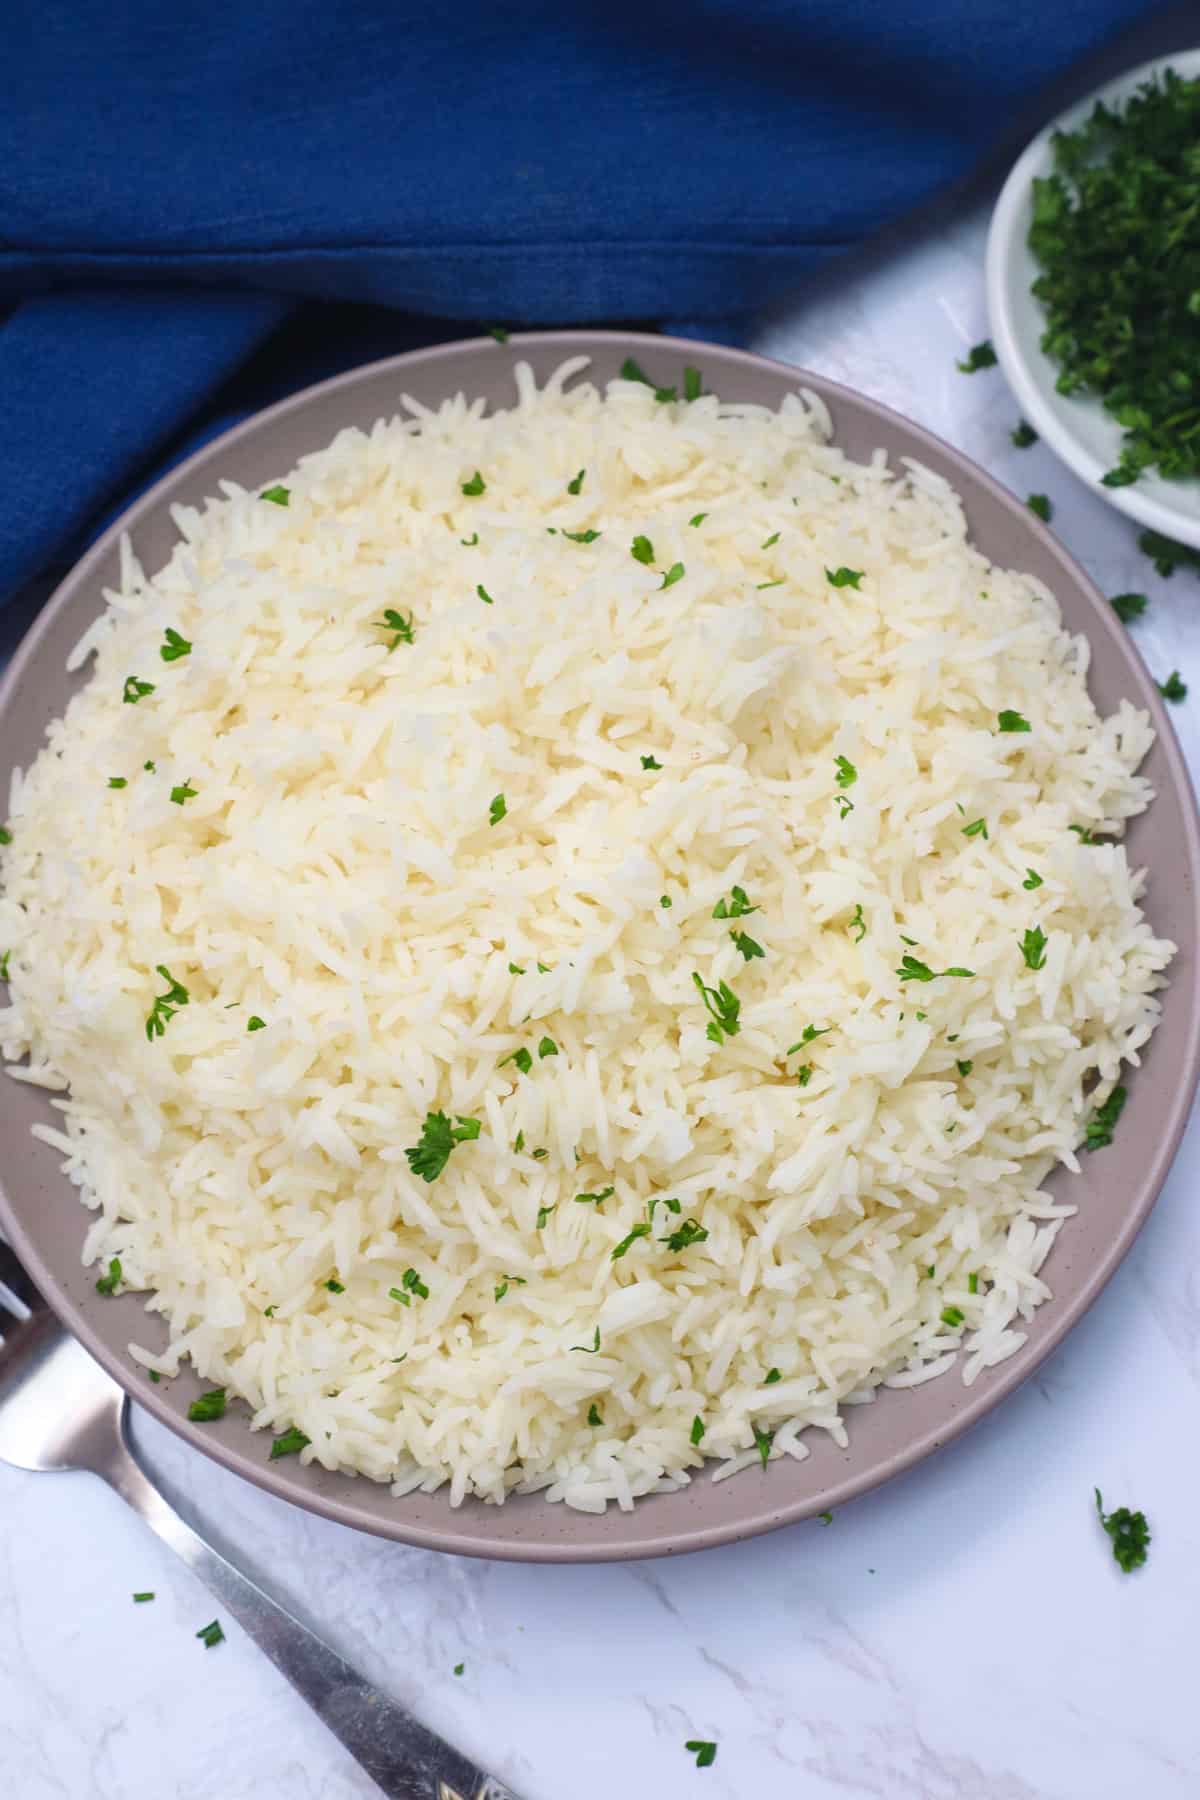 How to Cook Basmati Rice: Stovetop, Instant Pot & Slow Cooker